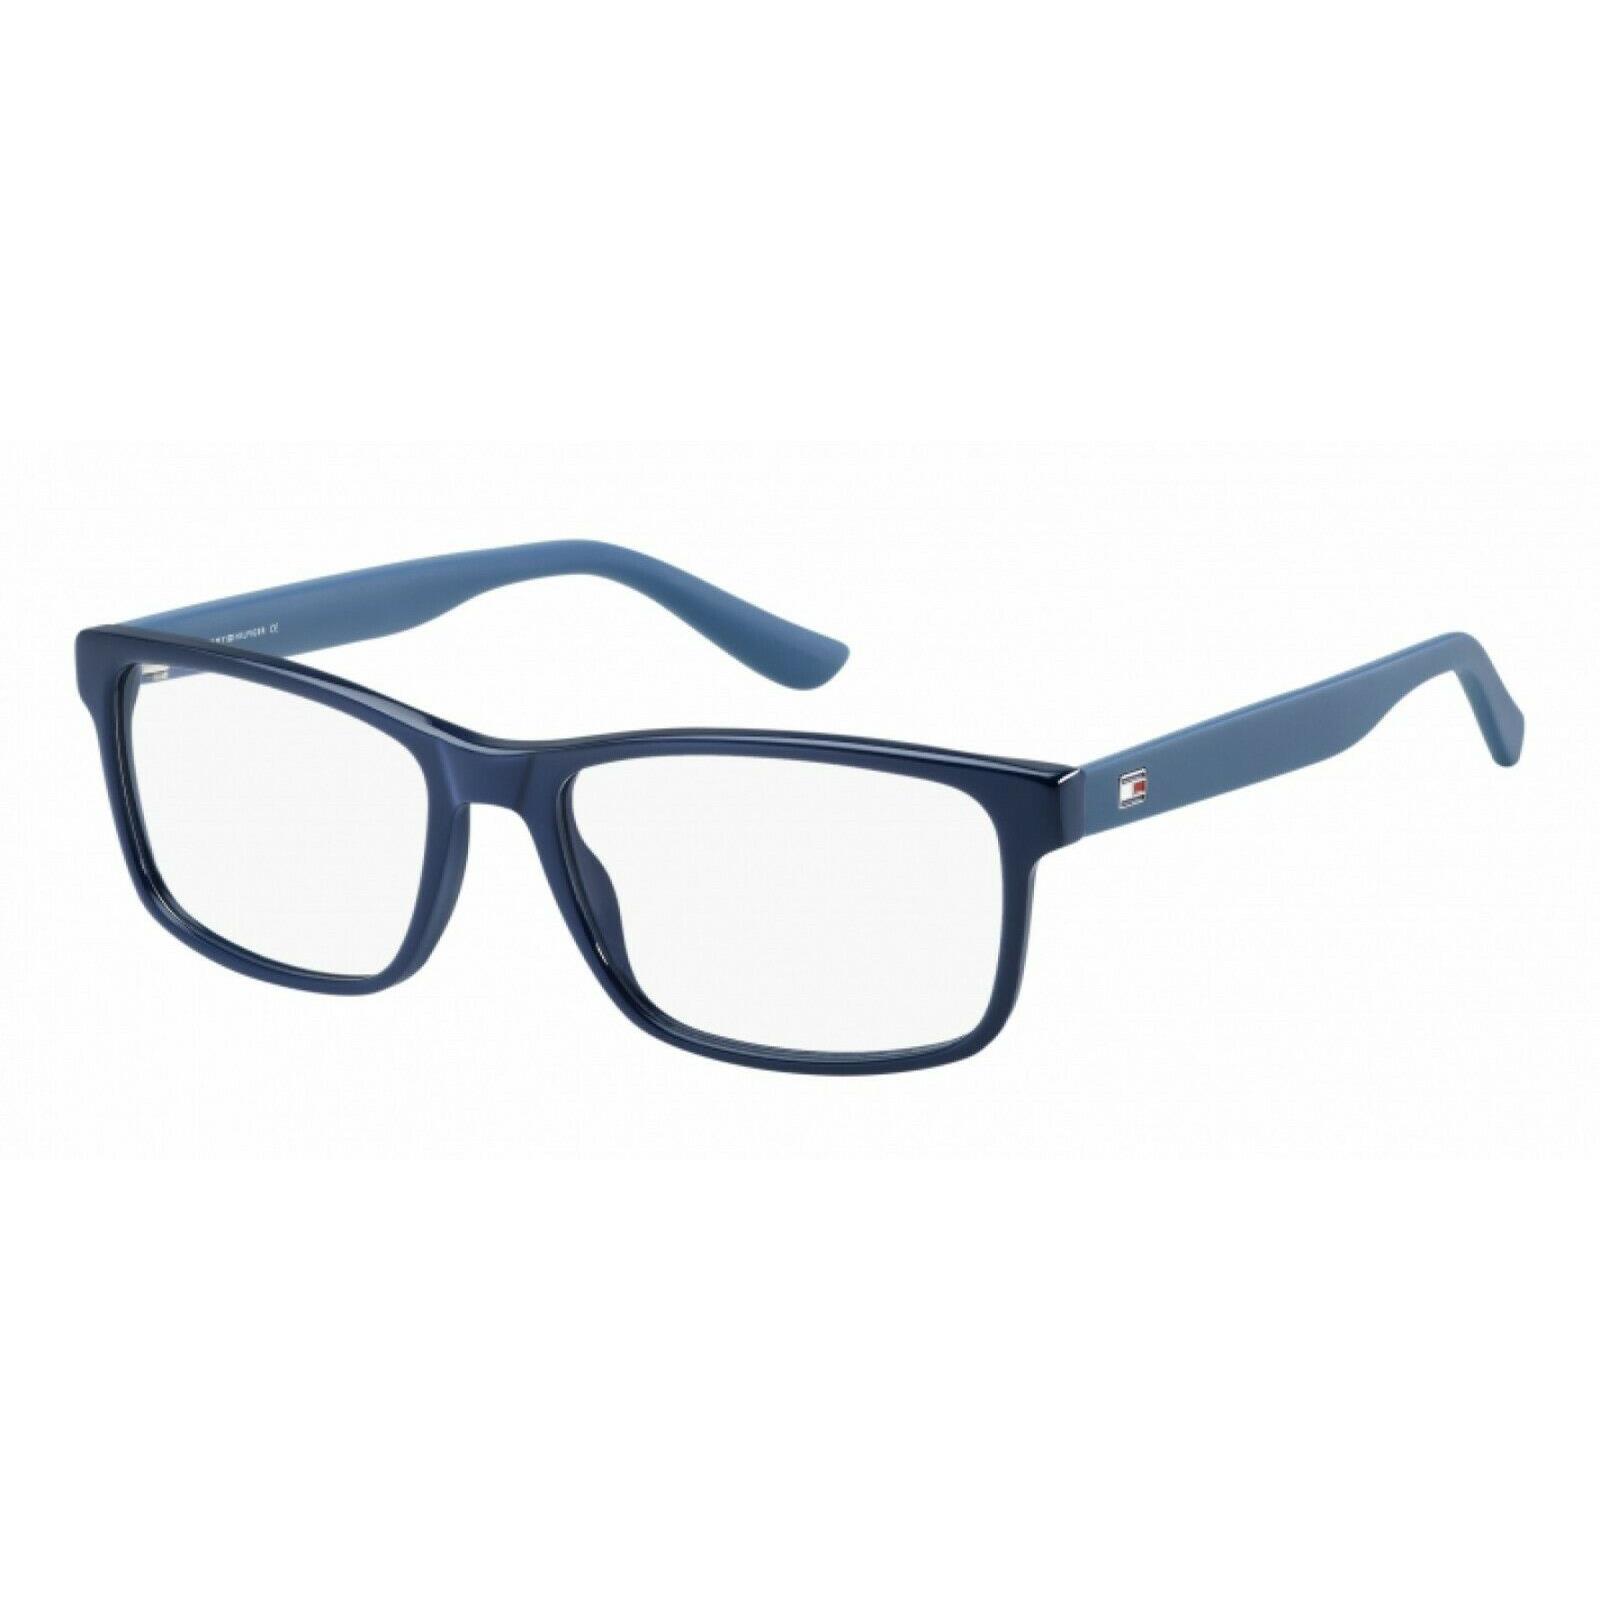 and Authenitc Tommy Hilfiger TH Th1419 Vyj Blue 56 17 140